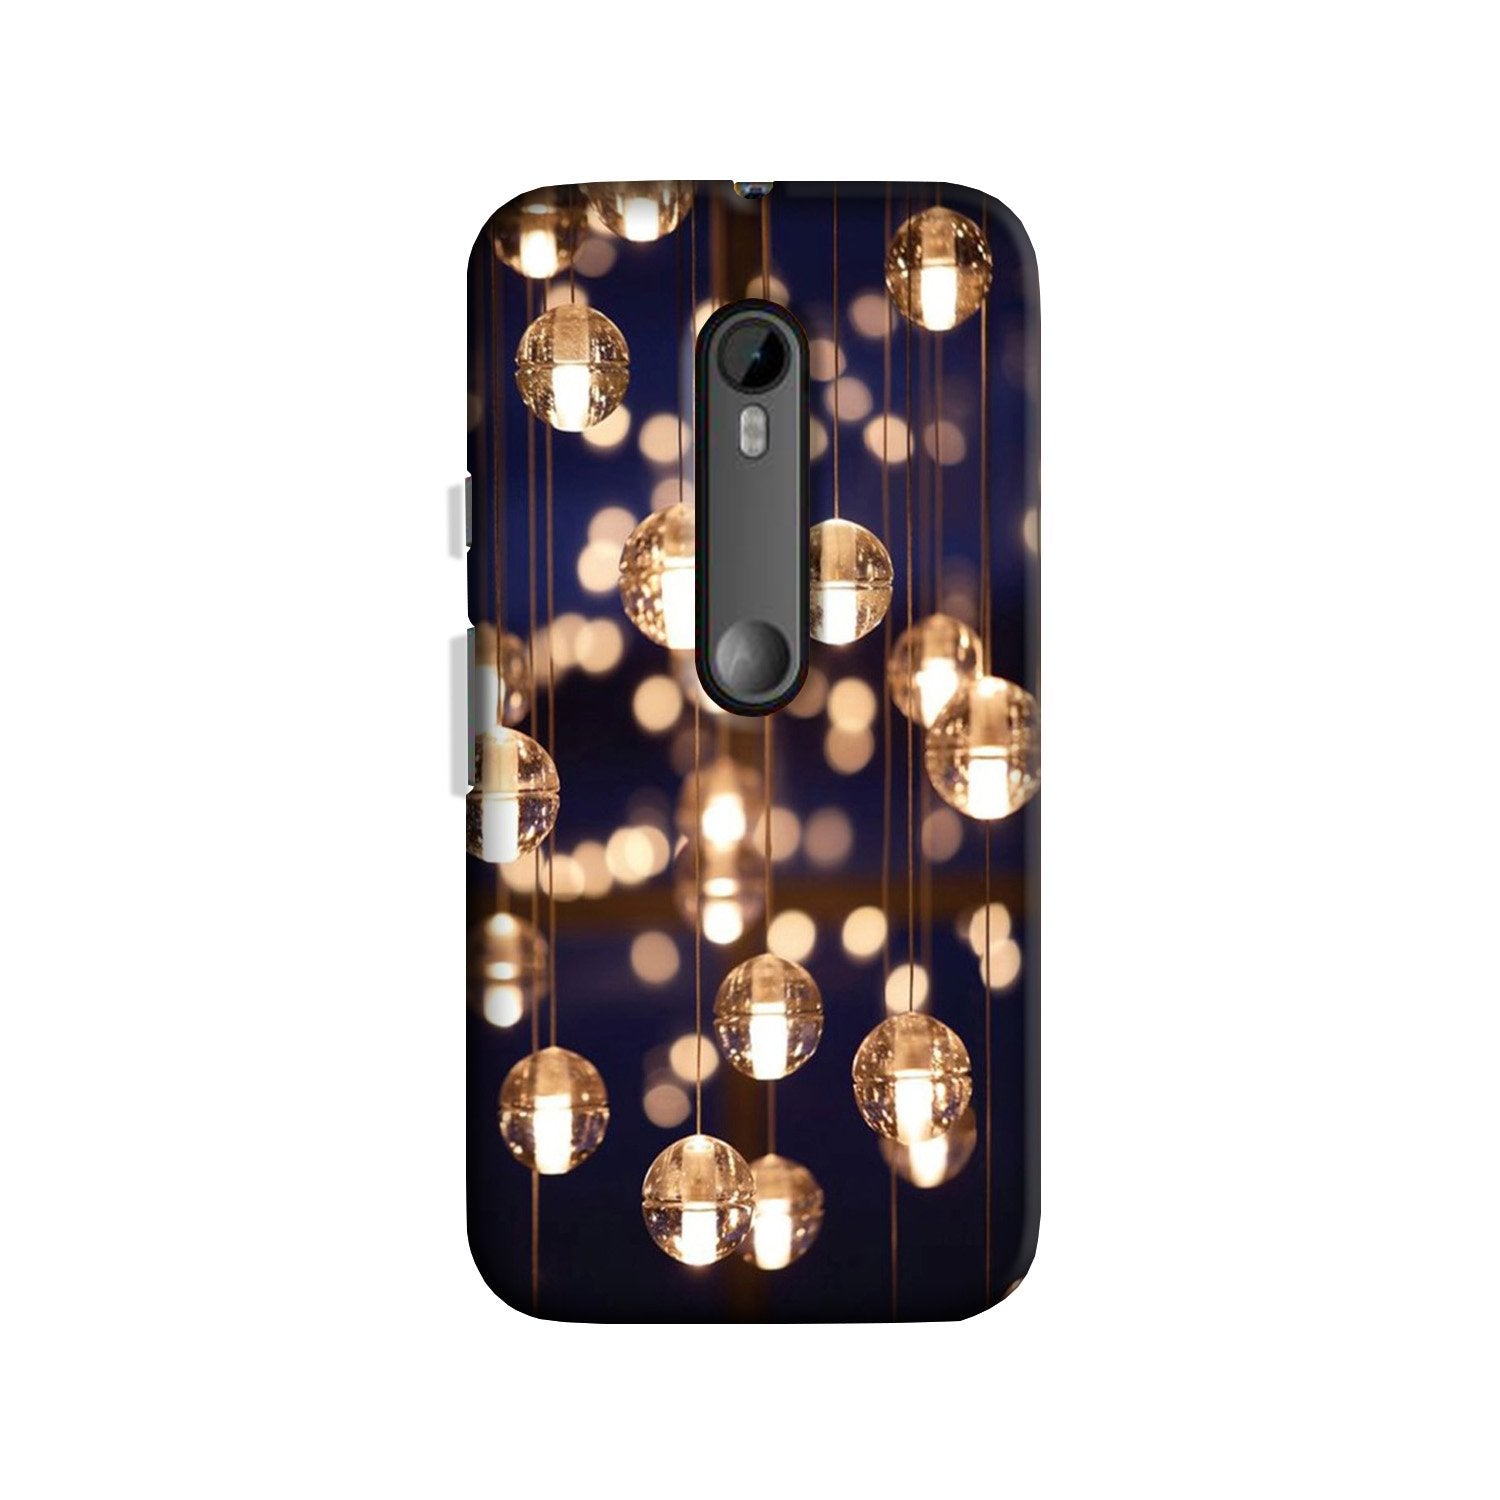 Party Bulb2 Case for Moto G3